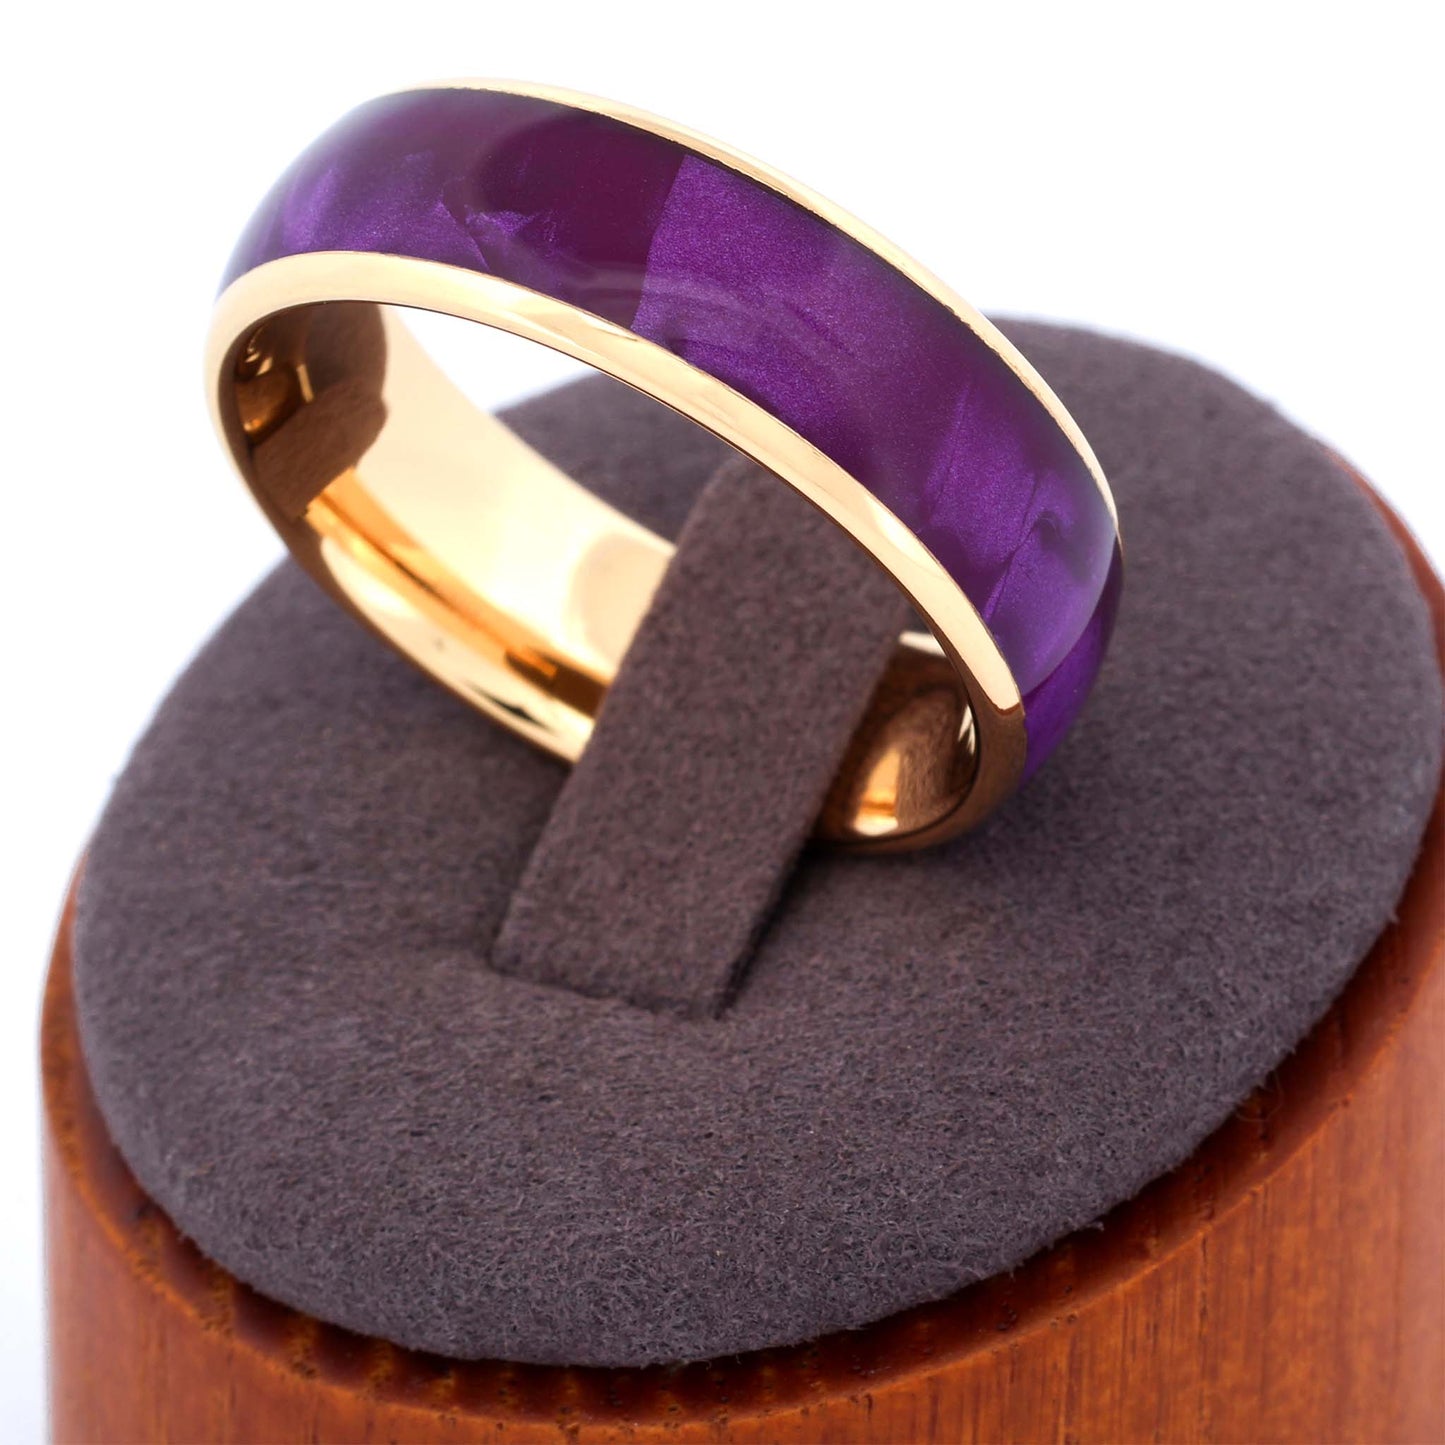 Gold Tungsten Men's Wedding Band with Purple Shell Inlay